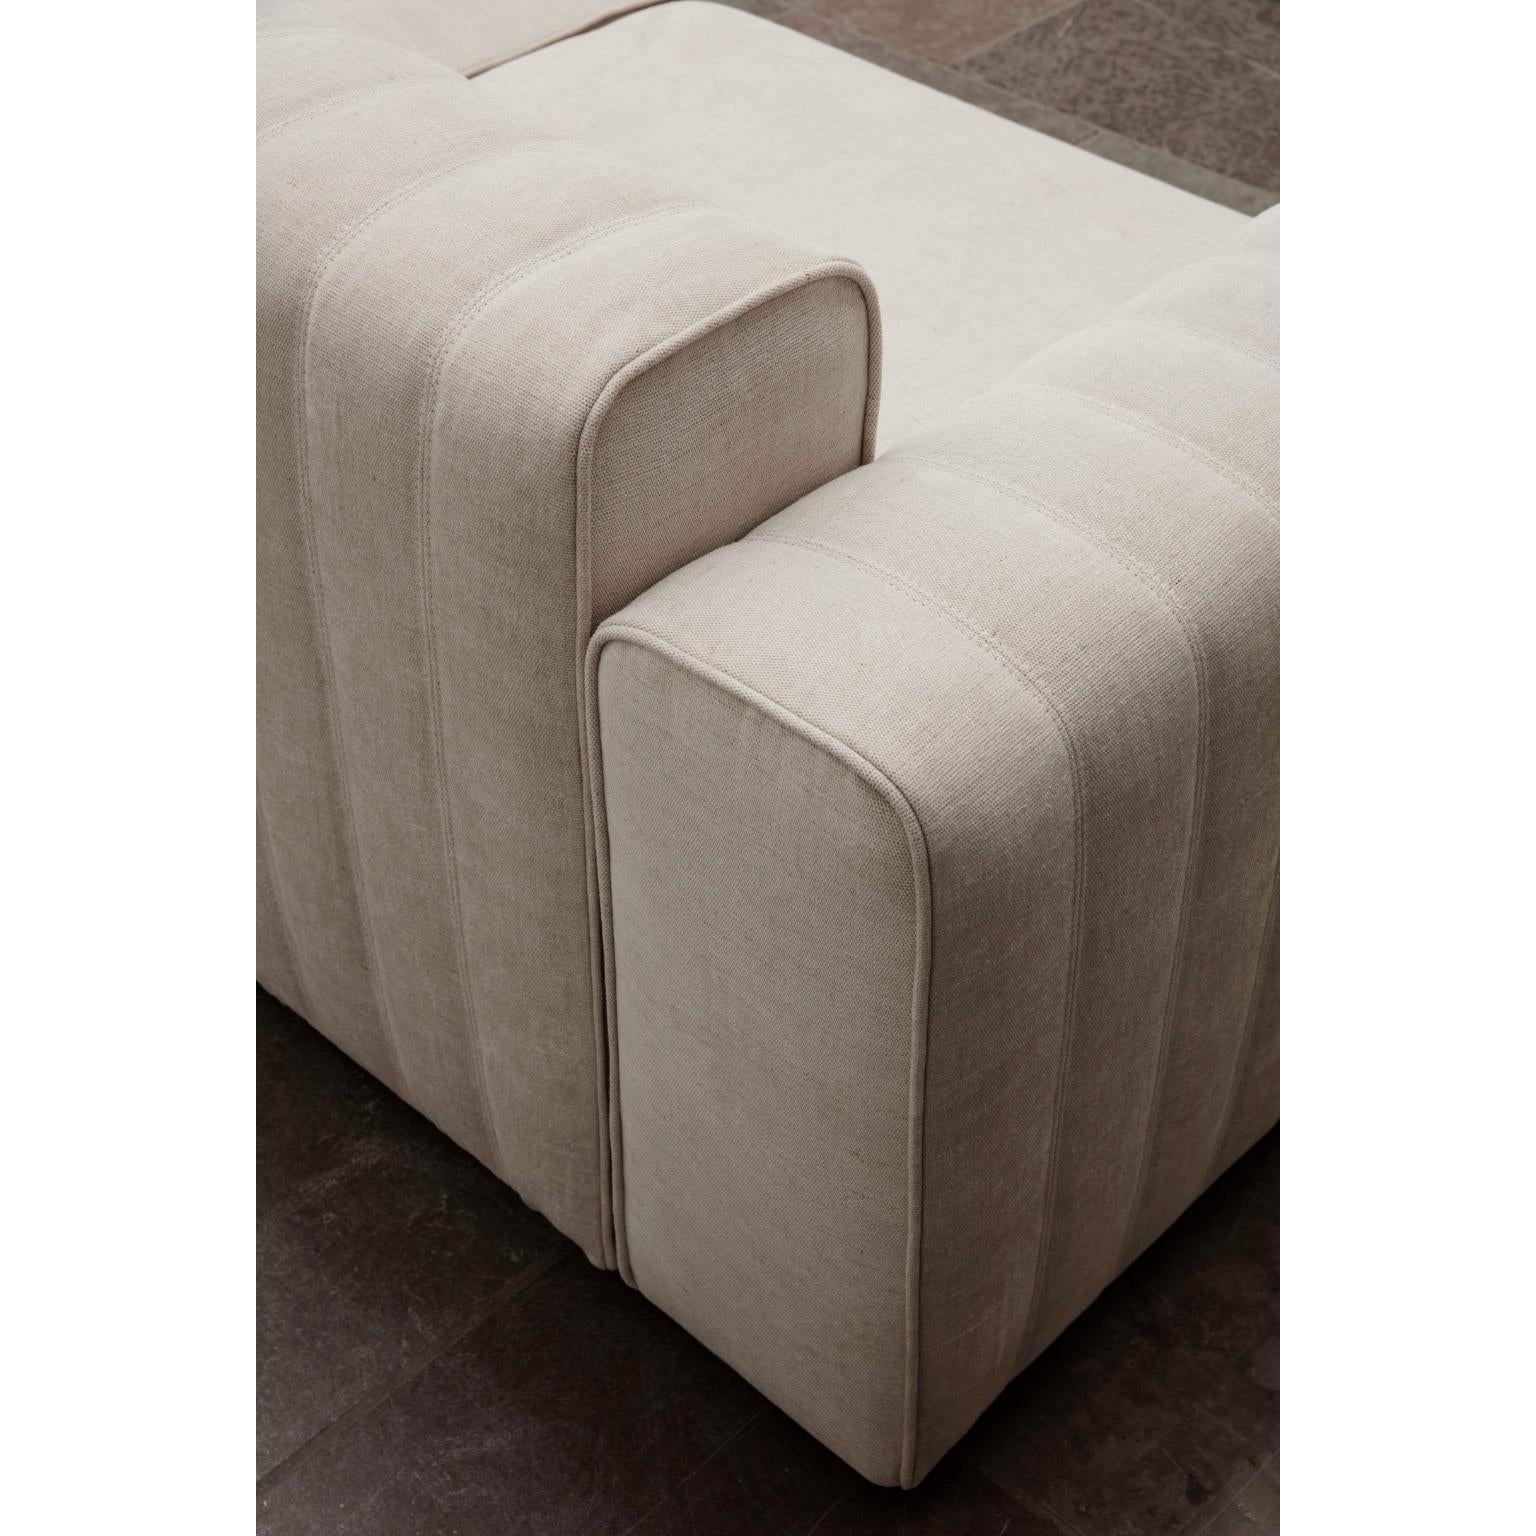 Riff Sofa by NORR11
Dimensions: D 92 x W 210 x H 70 cm. SH: 42 cm.
Materials: Foam, plywood and upholstery.
Upholstery: Barnum Boucle Color 3.

Available in a variety of fabrics and custom materials. Prices may vary. Deep seating and generous